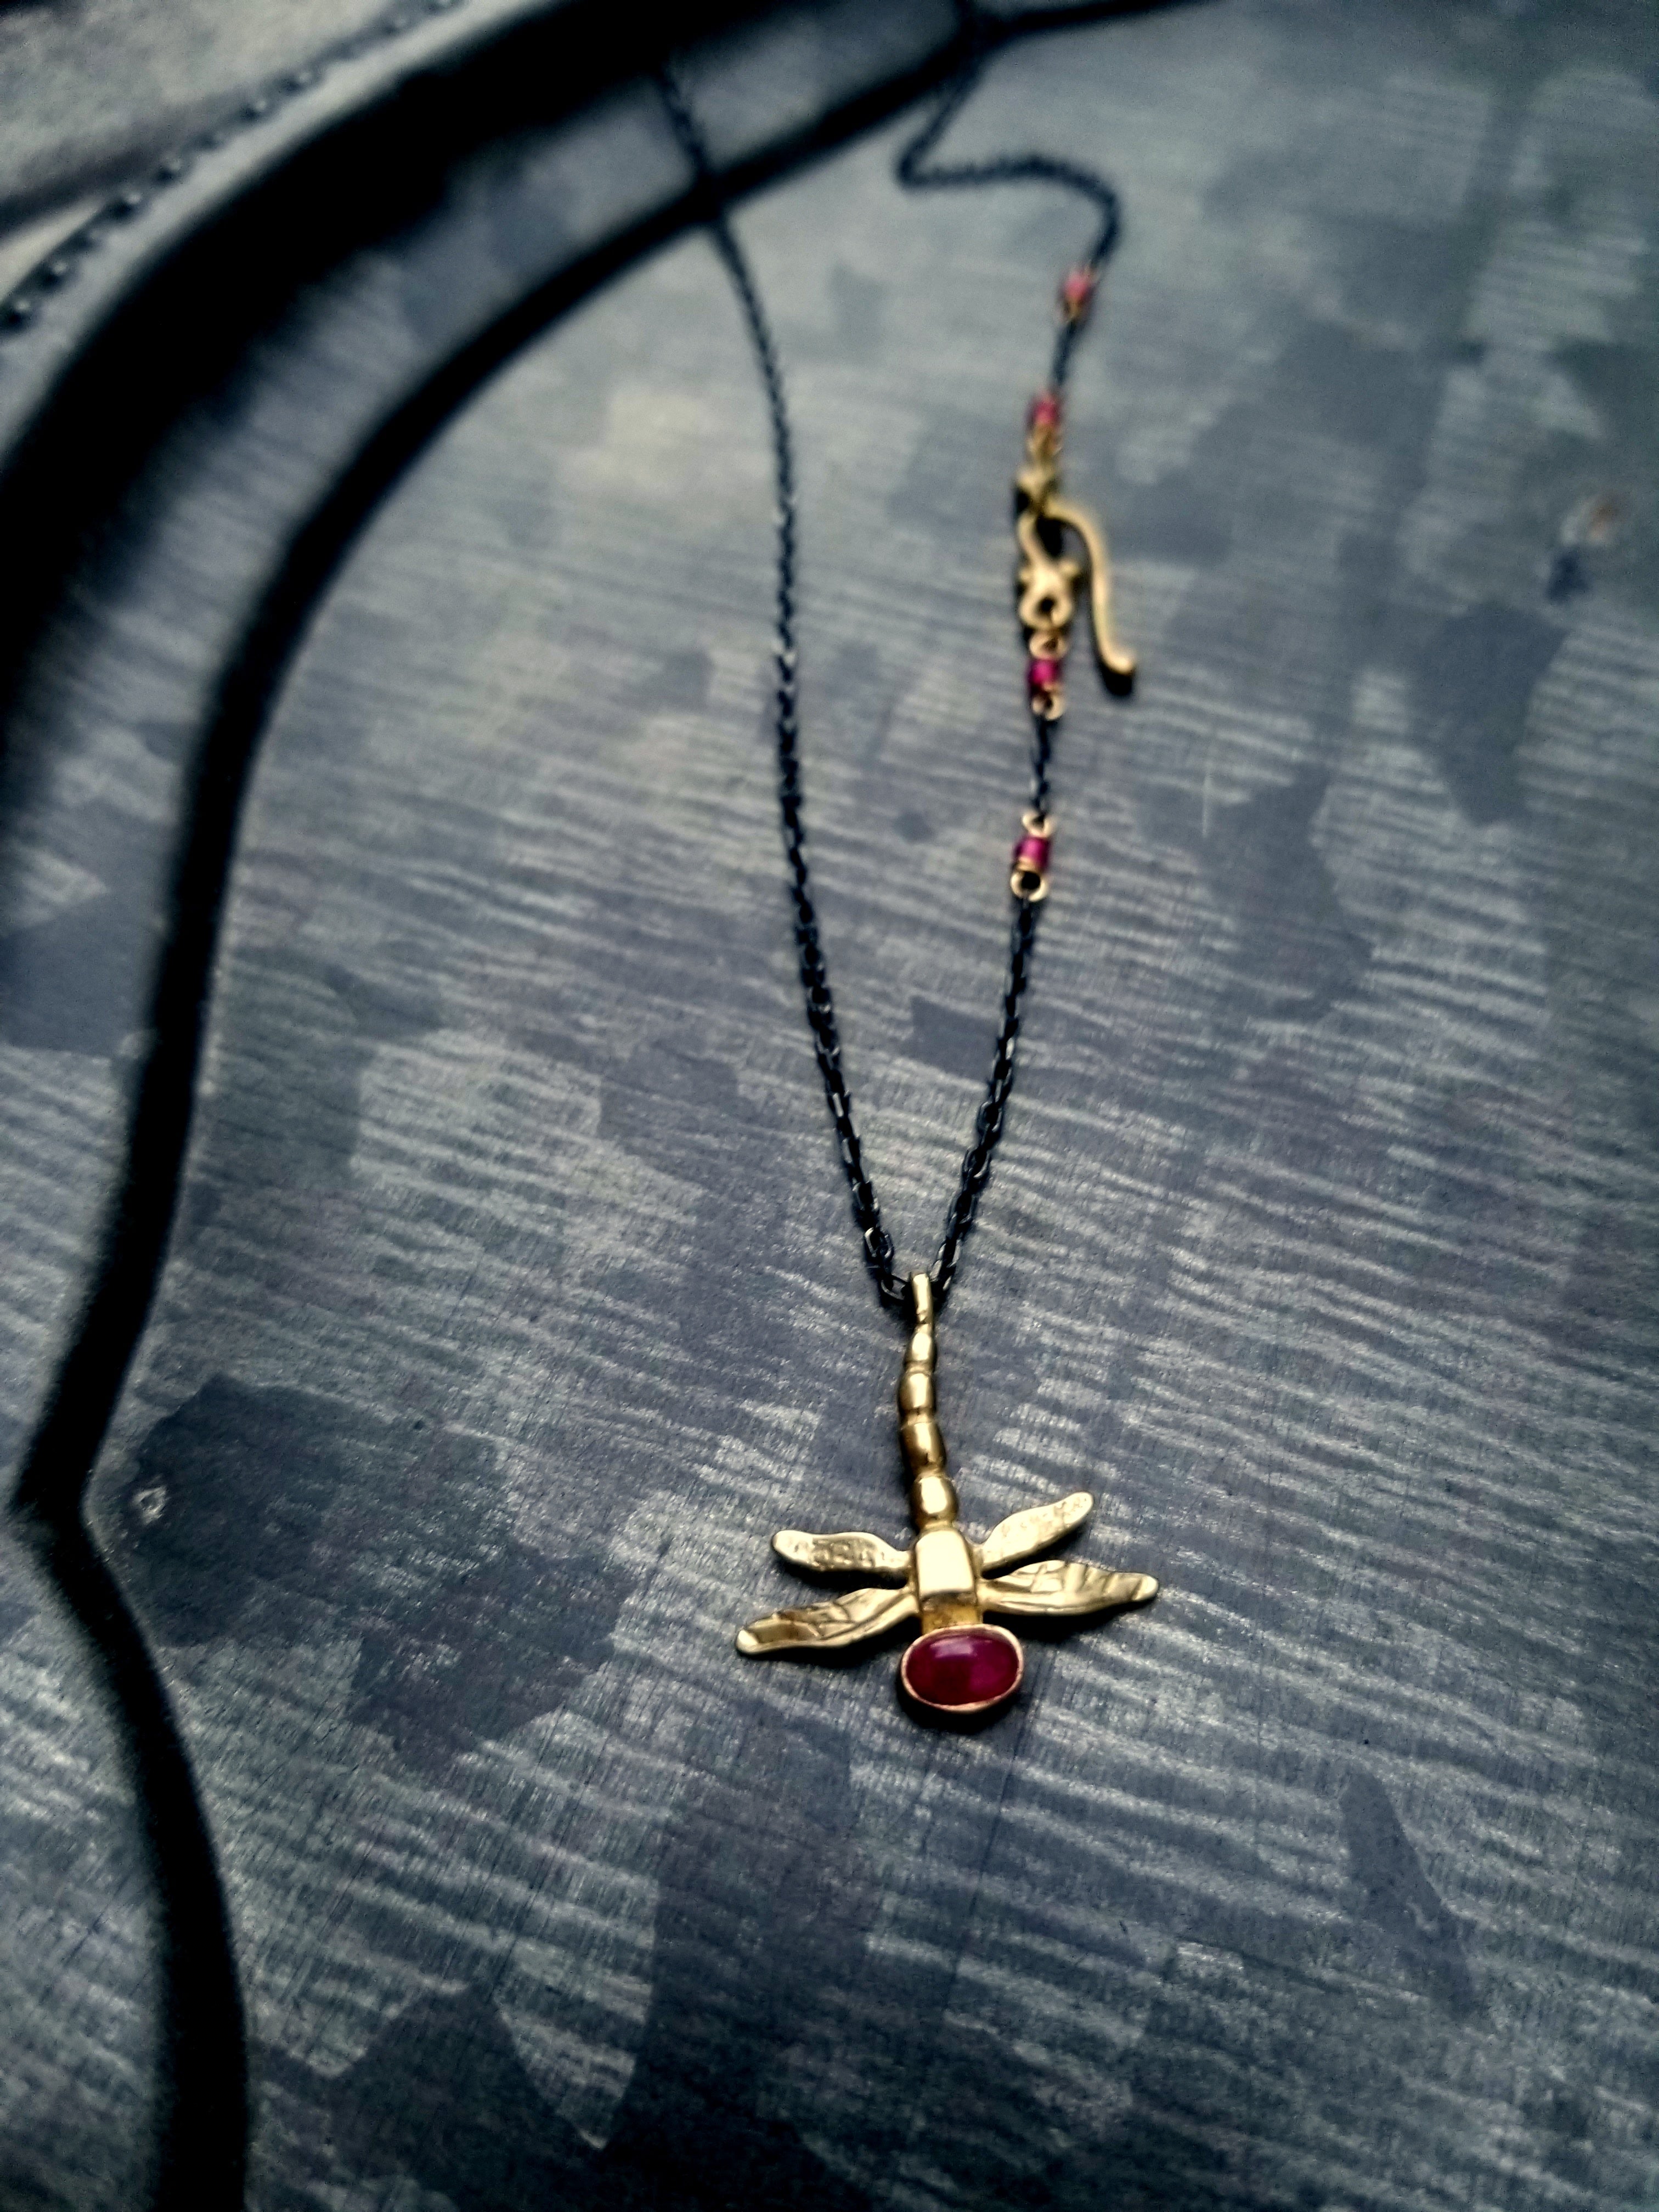 14k Dragonfly, set with Ruby cabochon, on  blackened Sterling Chain, 14k Hook Clasp. ©Teresa de la Guardia, All Rights Reserved 